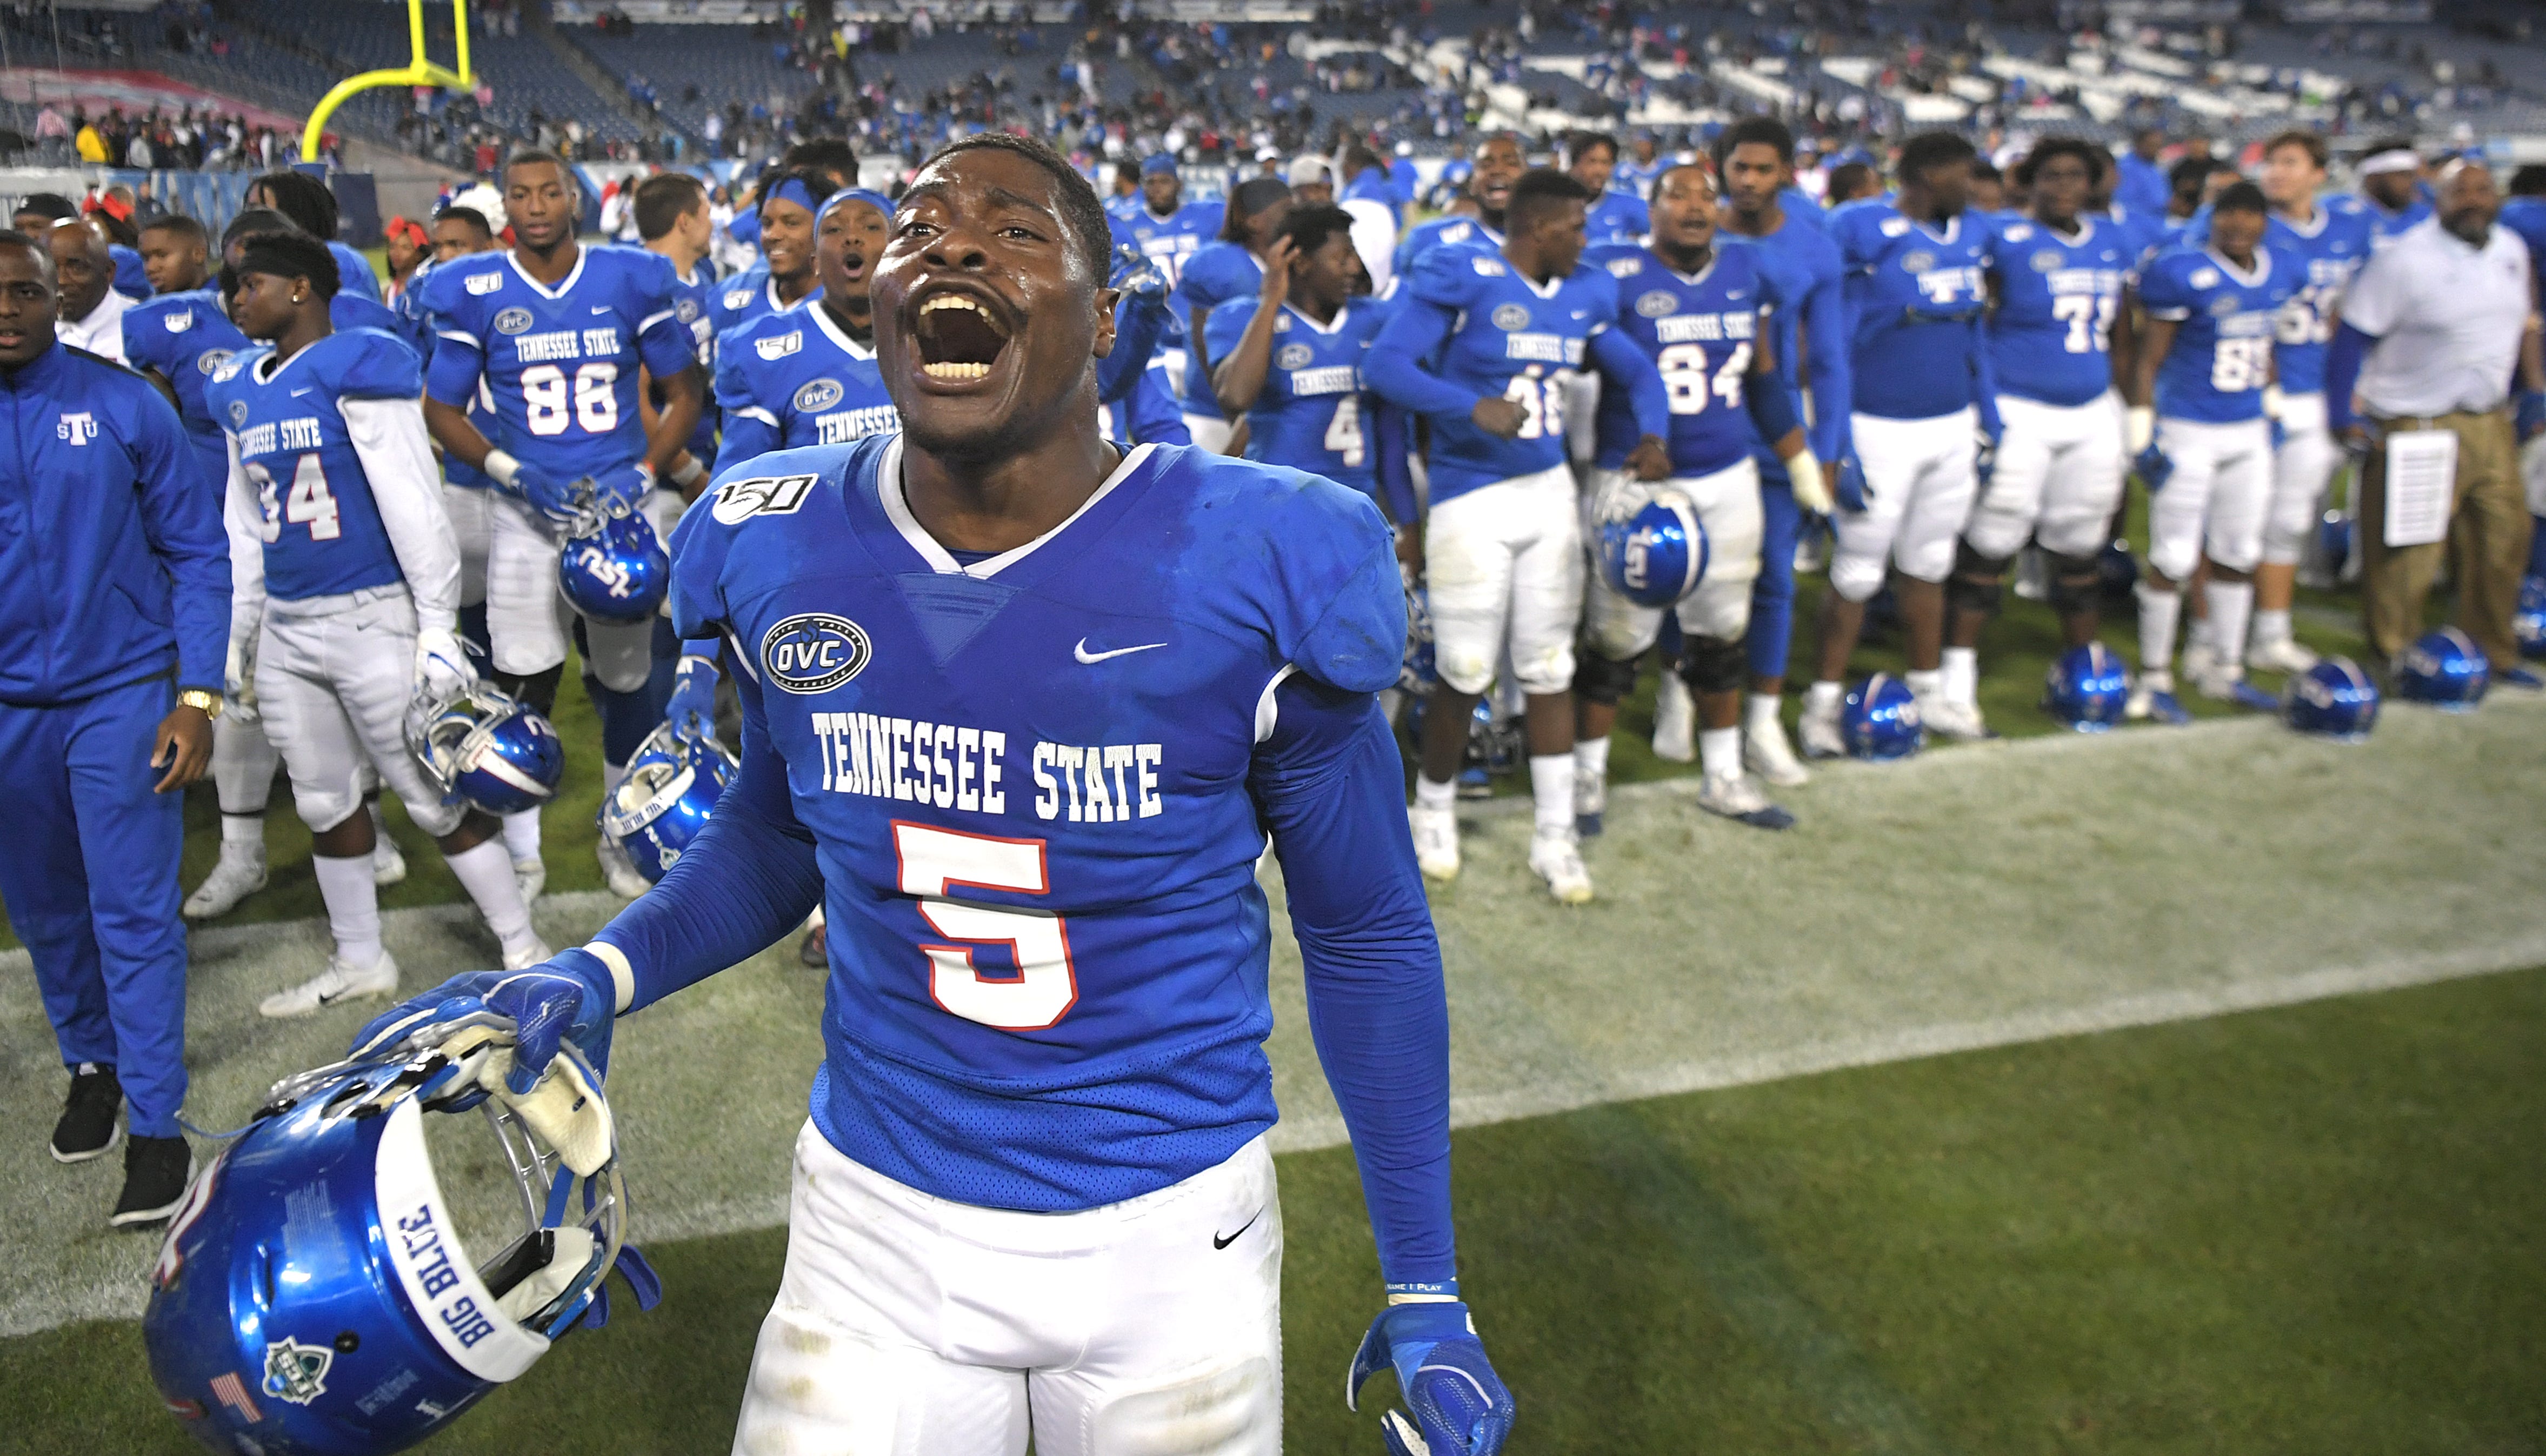 Everything you need to know about Tennessee State's